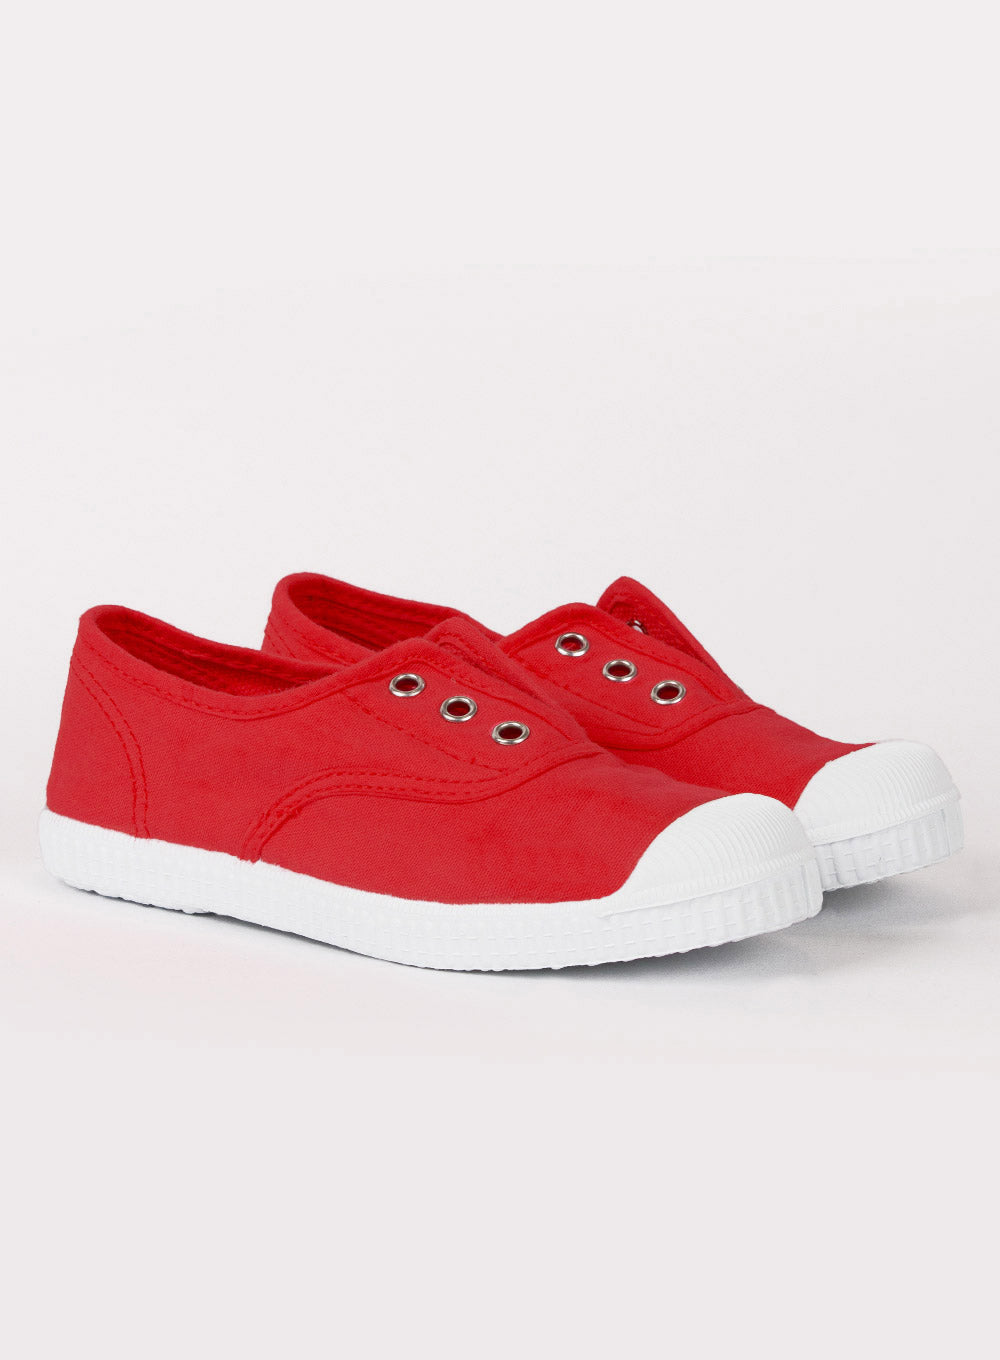 Pimfylm Toddler Sneakers Boy Toddler Shoes Boys Girls, Toddler Canvas  Sneakers Red 6.5 - Walmart.com